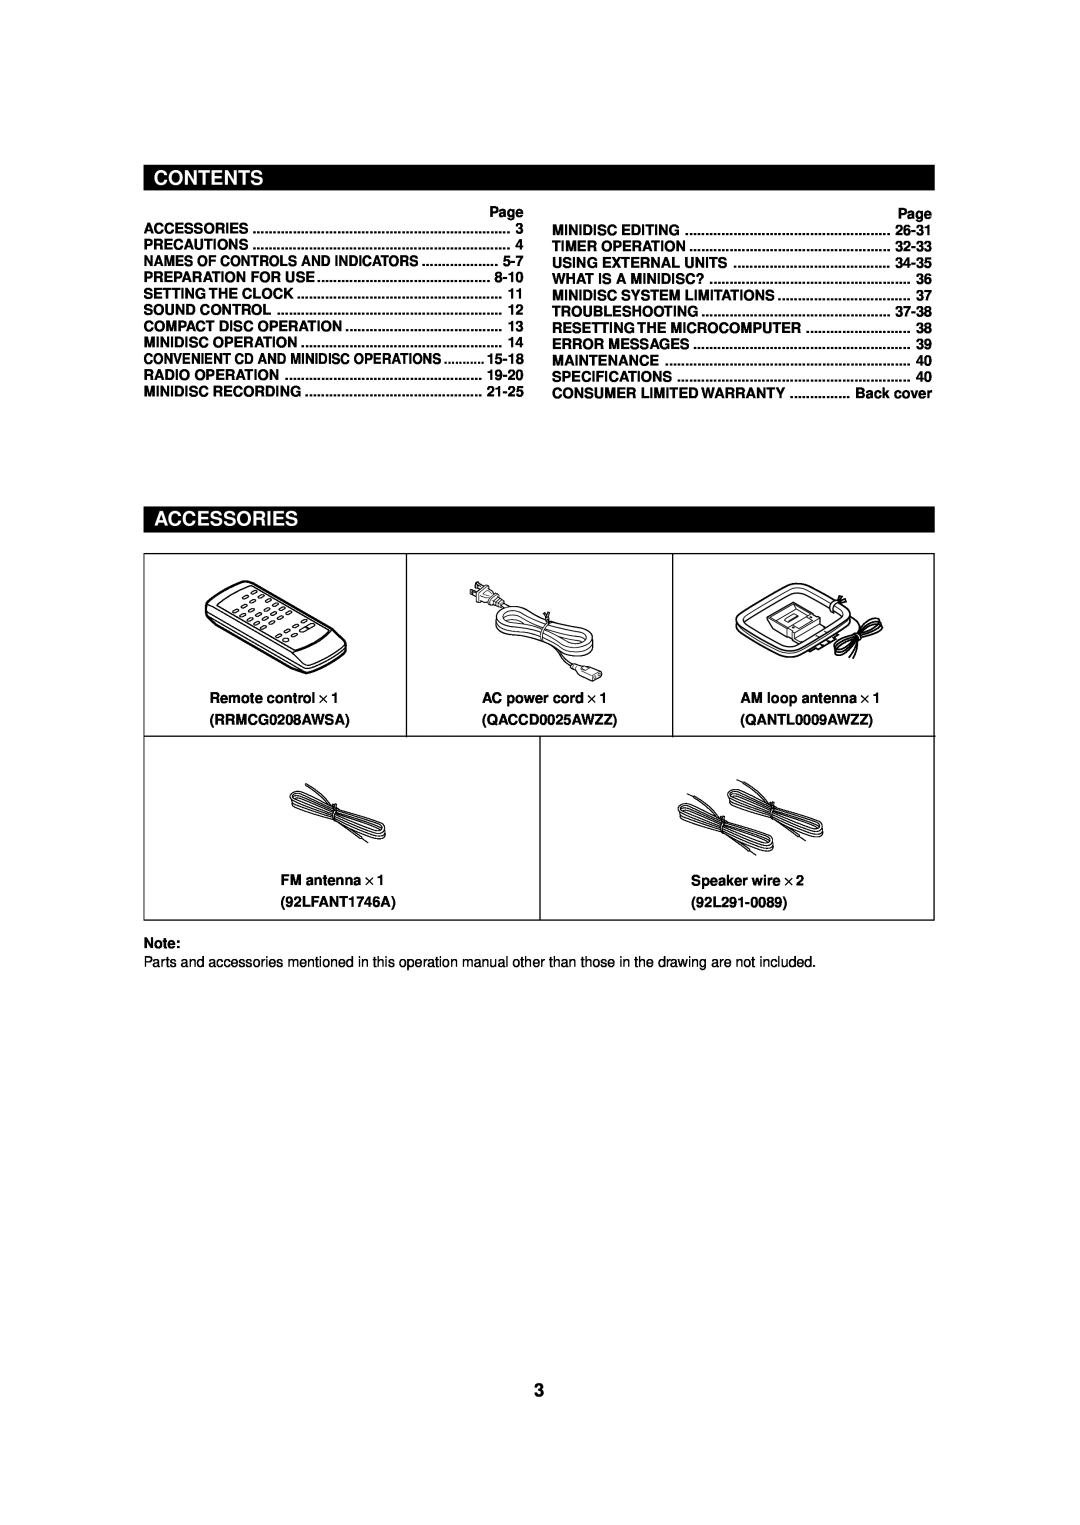 Sharp MD-MX20 operation manual Contents, Accessories 